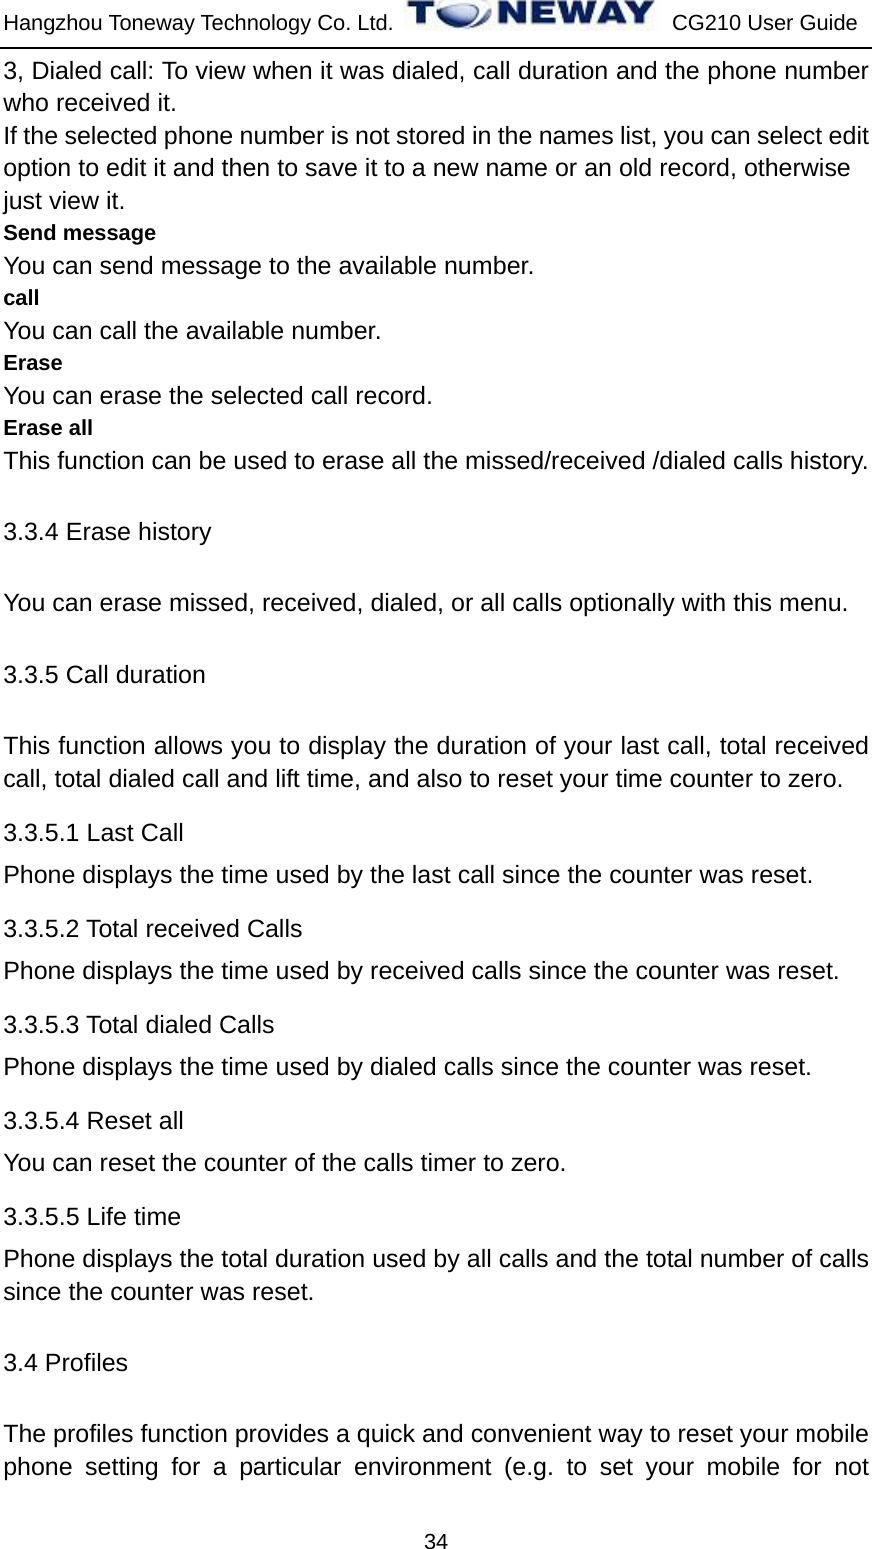 Hangzhou Toneway Technology Co. Ltd.    CG210 User Guide 34 3, Dialed call: To view when it was dialed, call duration and the phone number who received it. If the selected phone number is not stored in the names list, you can select edit   option to edit it and then to save it to a new name or an old record, otherwise   just view it. Send message You can send message to the available number. call You can call the available number. Erase You can erase the selected call record. Erase all This function can be used to erase all the missed/received /dialed calls history. 3.3.4 Erase history You can erase missed, received, dialed, or all calls optionally with this menu. 3.3.5 Call duration This function allows you to display the duration of your last call, total received call, total dialed call and lift time, and also to reset your time counter to zero. 3.3.5.1 Last Call Phone displays the time used by the last call since the counter was reset. 3.3.5.2 Total received Calls Phone displays the time used by received calls since the counter was reset. 3.3.5.3 Total dialed Calls Phone displays the time used by dialed calls since the counter was reset. 3.3.5.4 Reset all You can reset the counter of the calls timer to zero.   3.3.5.5 Life time Phone displays the total duration used by all calls and the total number of calls since the counter was reset. 3.4 Profiles The profiles function provides a quick and convenient way to reset your mobile phone setting for a particular environment (e.g. to set your mobile for not 